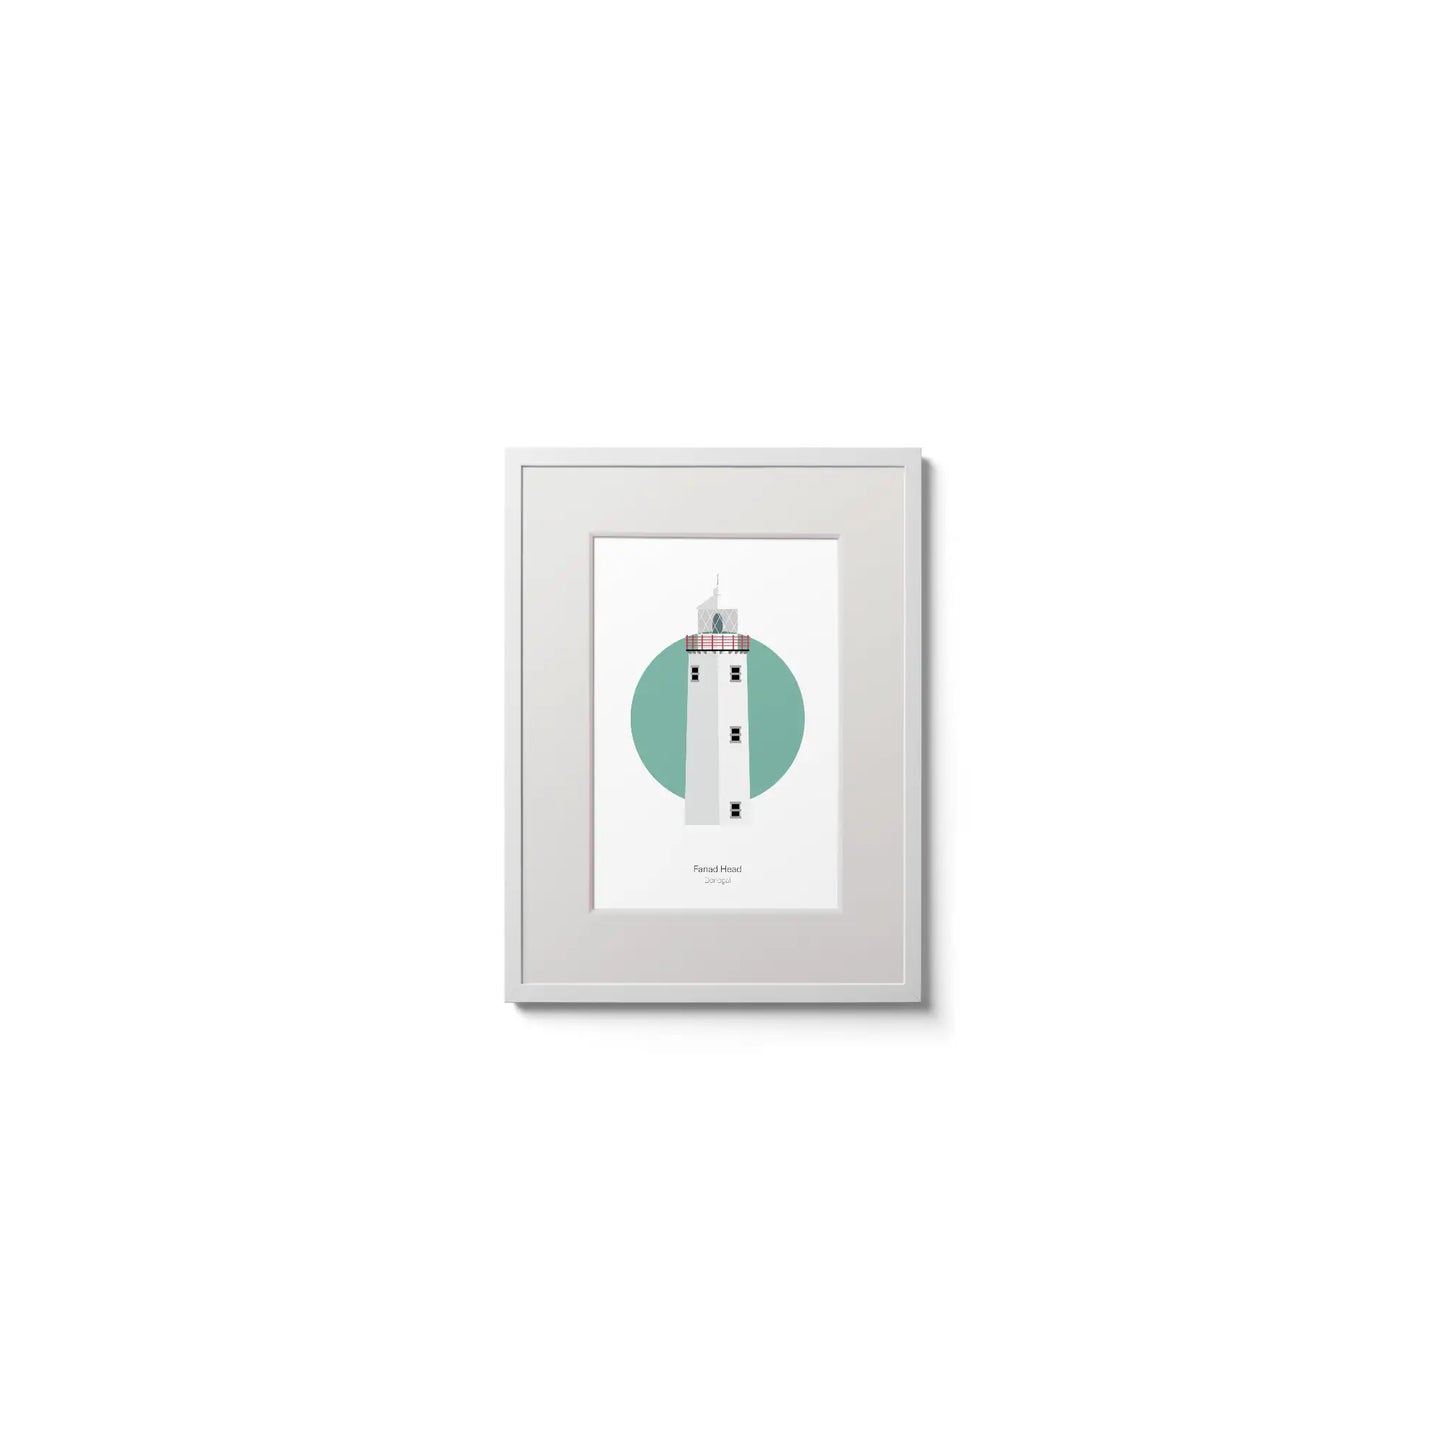 Illustration of Fanad Head lighthouse on a white background inside light blue square,  in a white frame measuring 15x20cm.